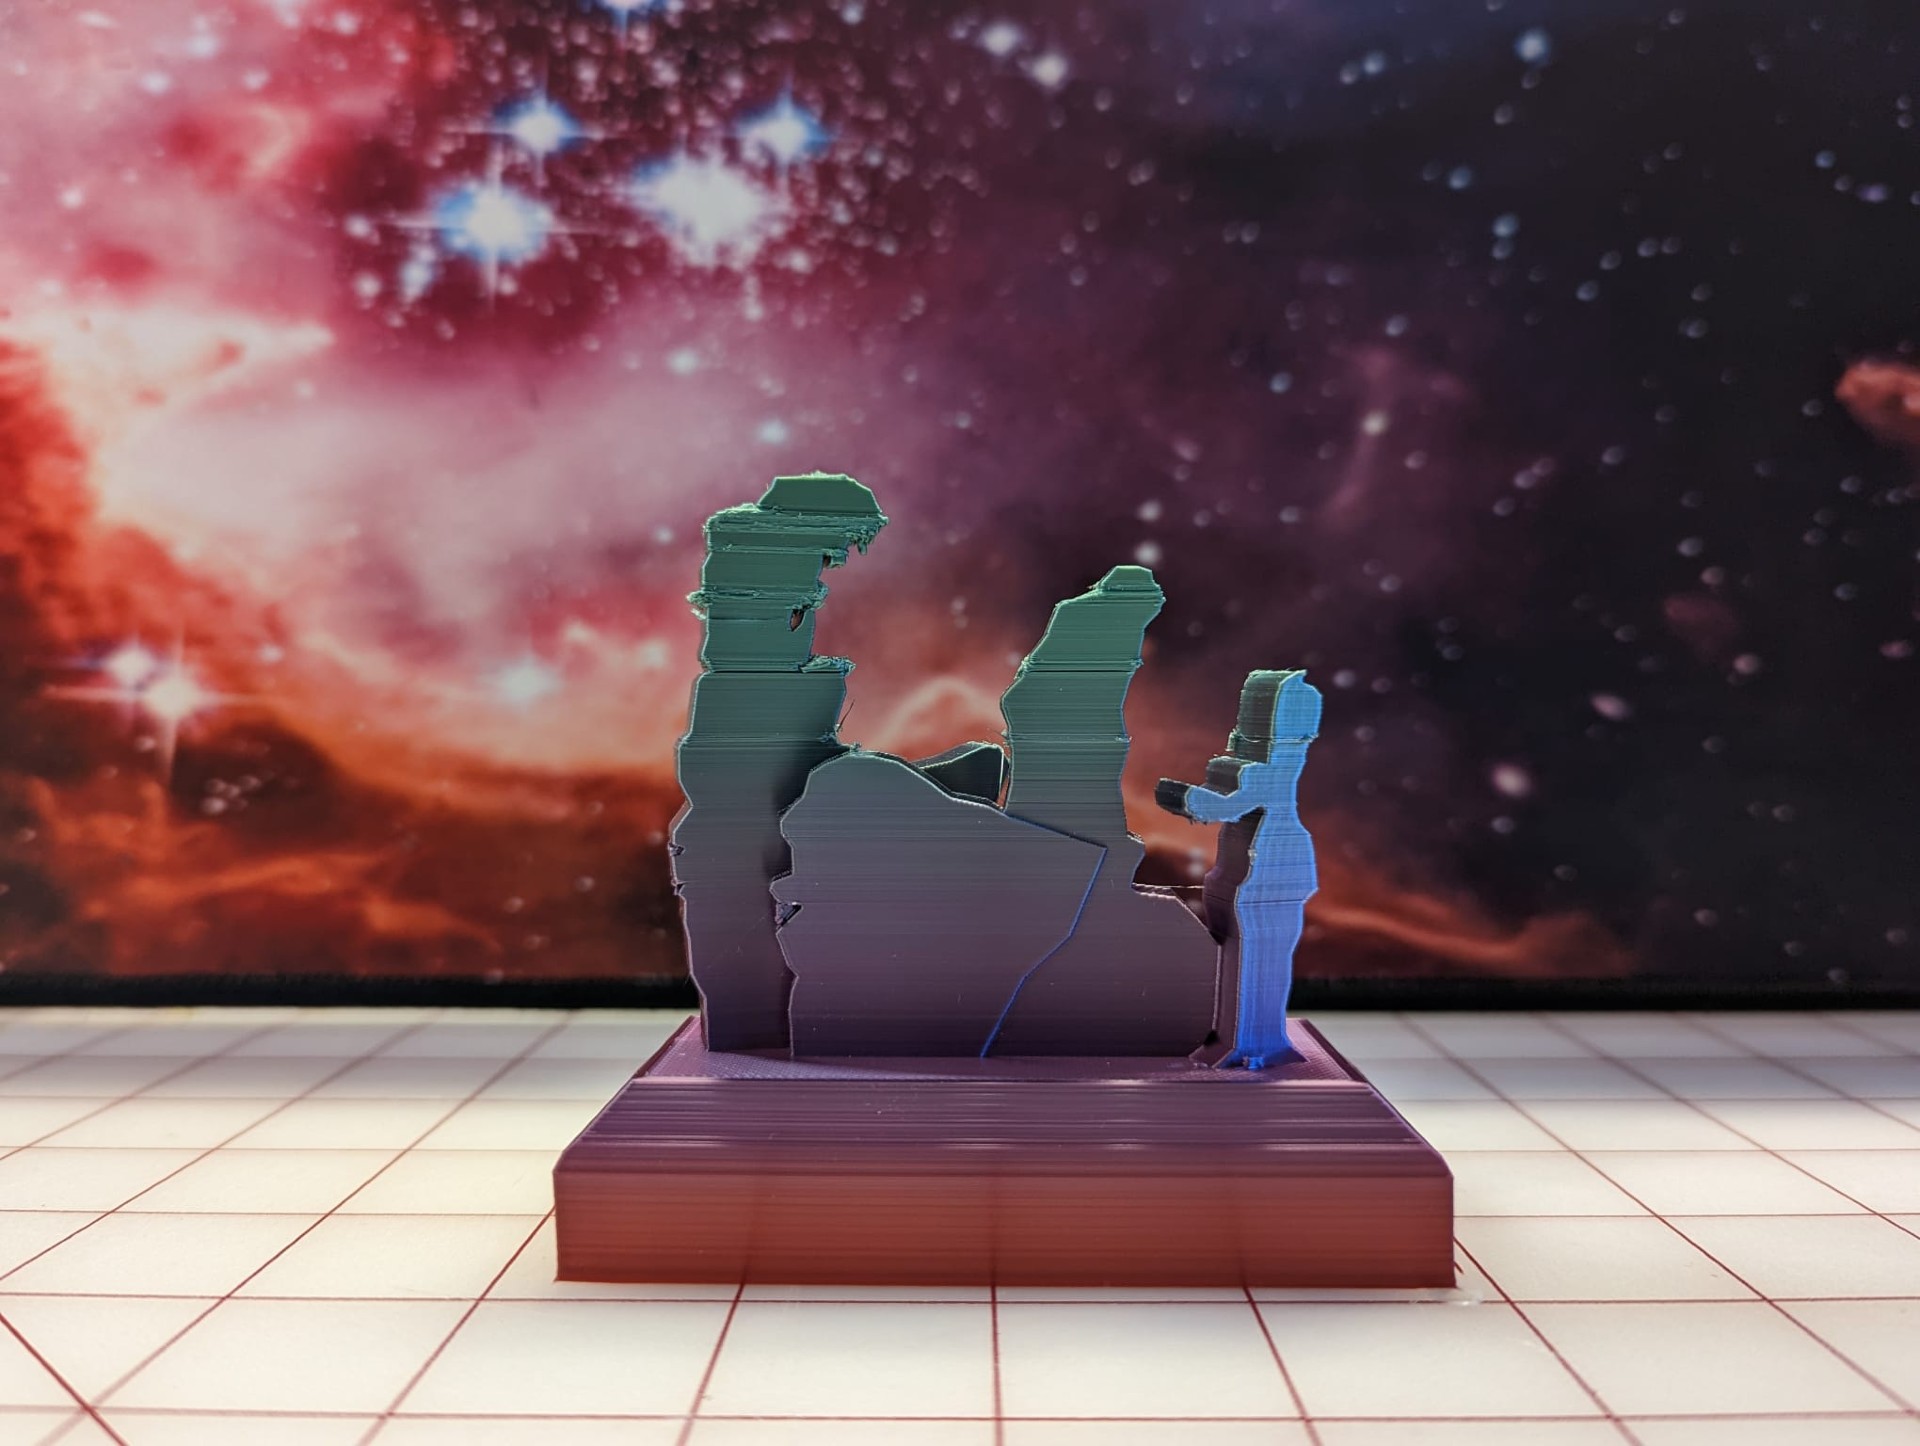 A 3D printed model of the Pillars of Creation in the Eagle Nebula, in the constellation of the Serpents.